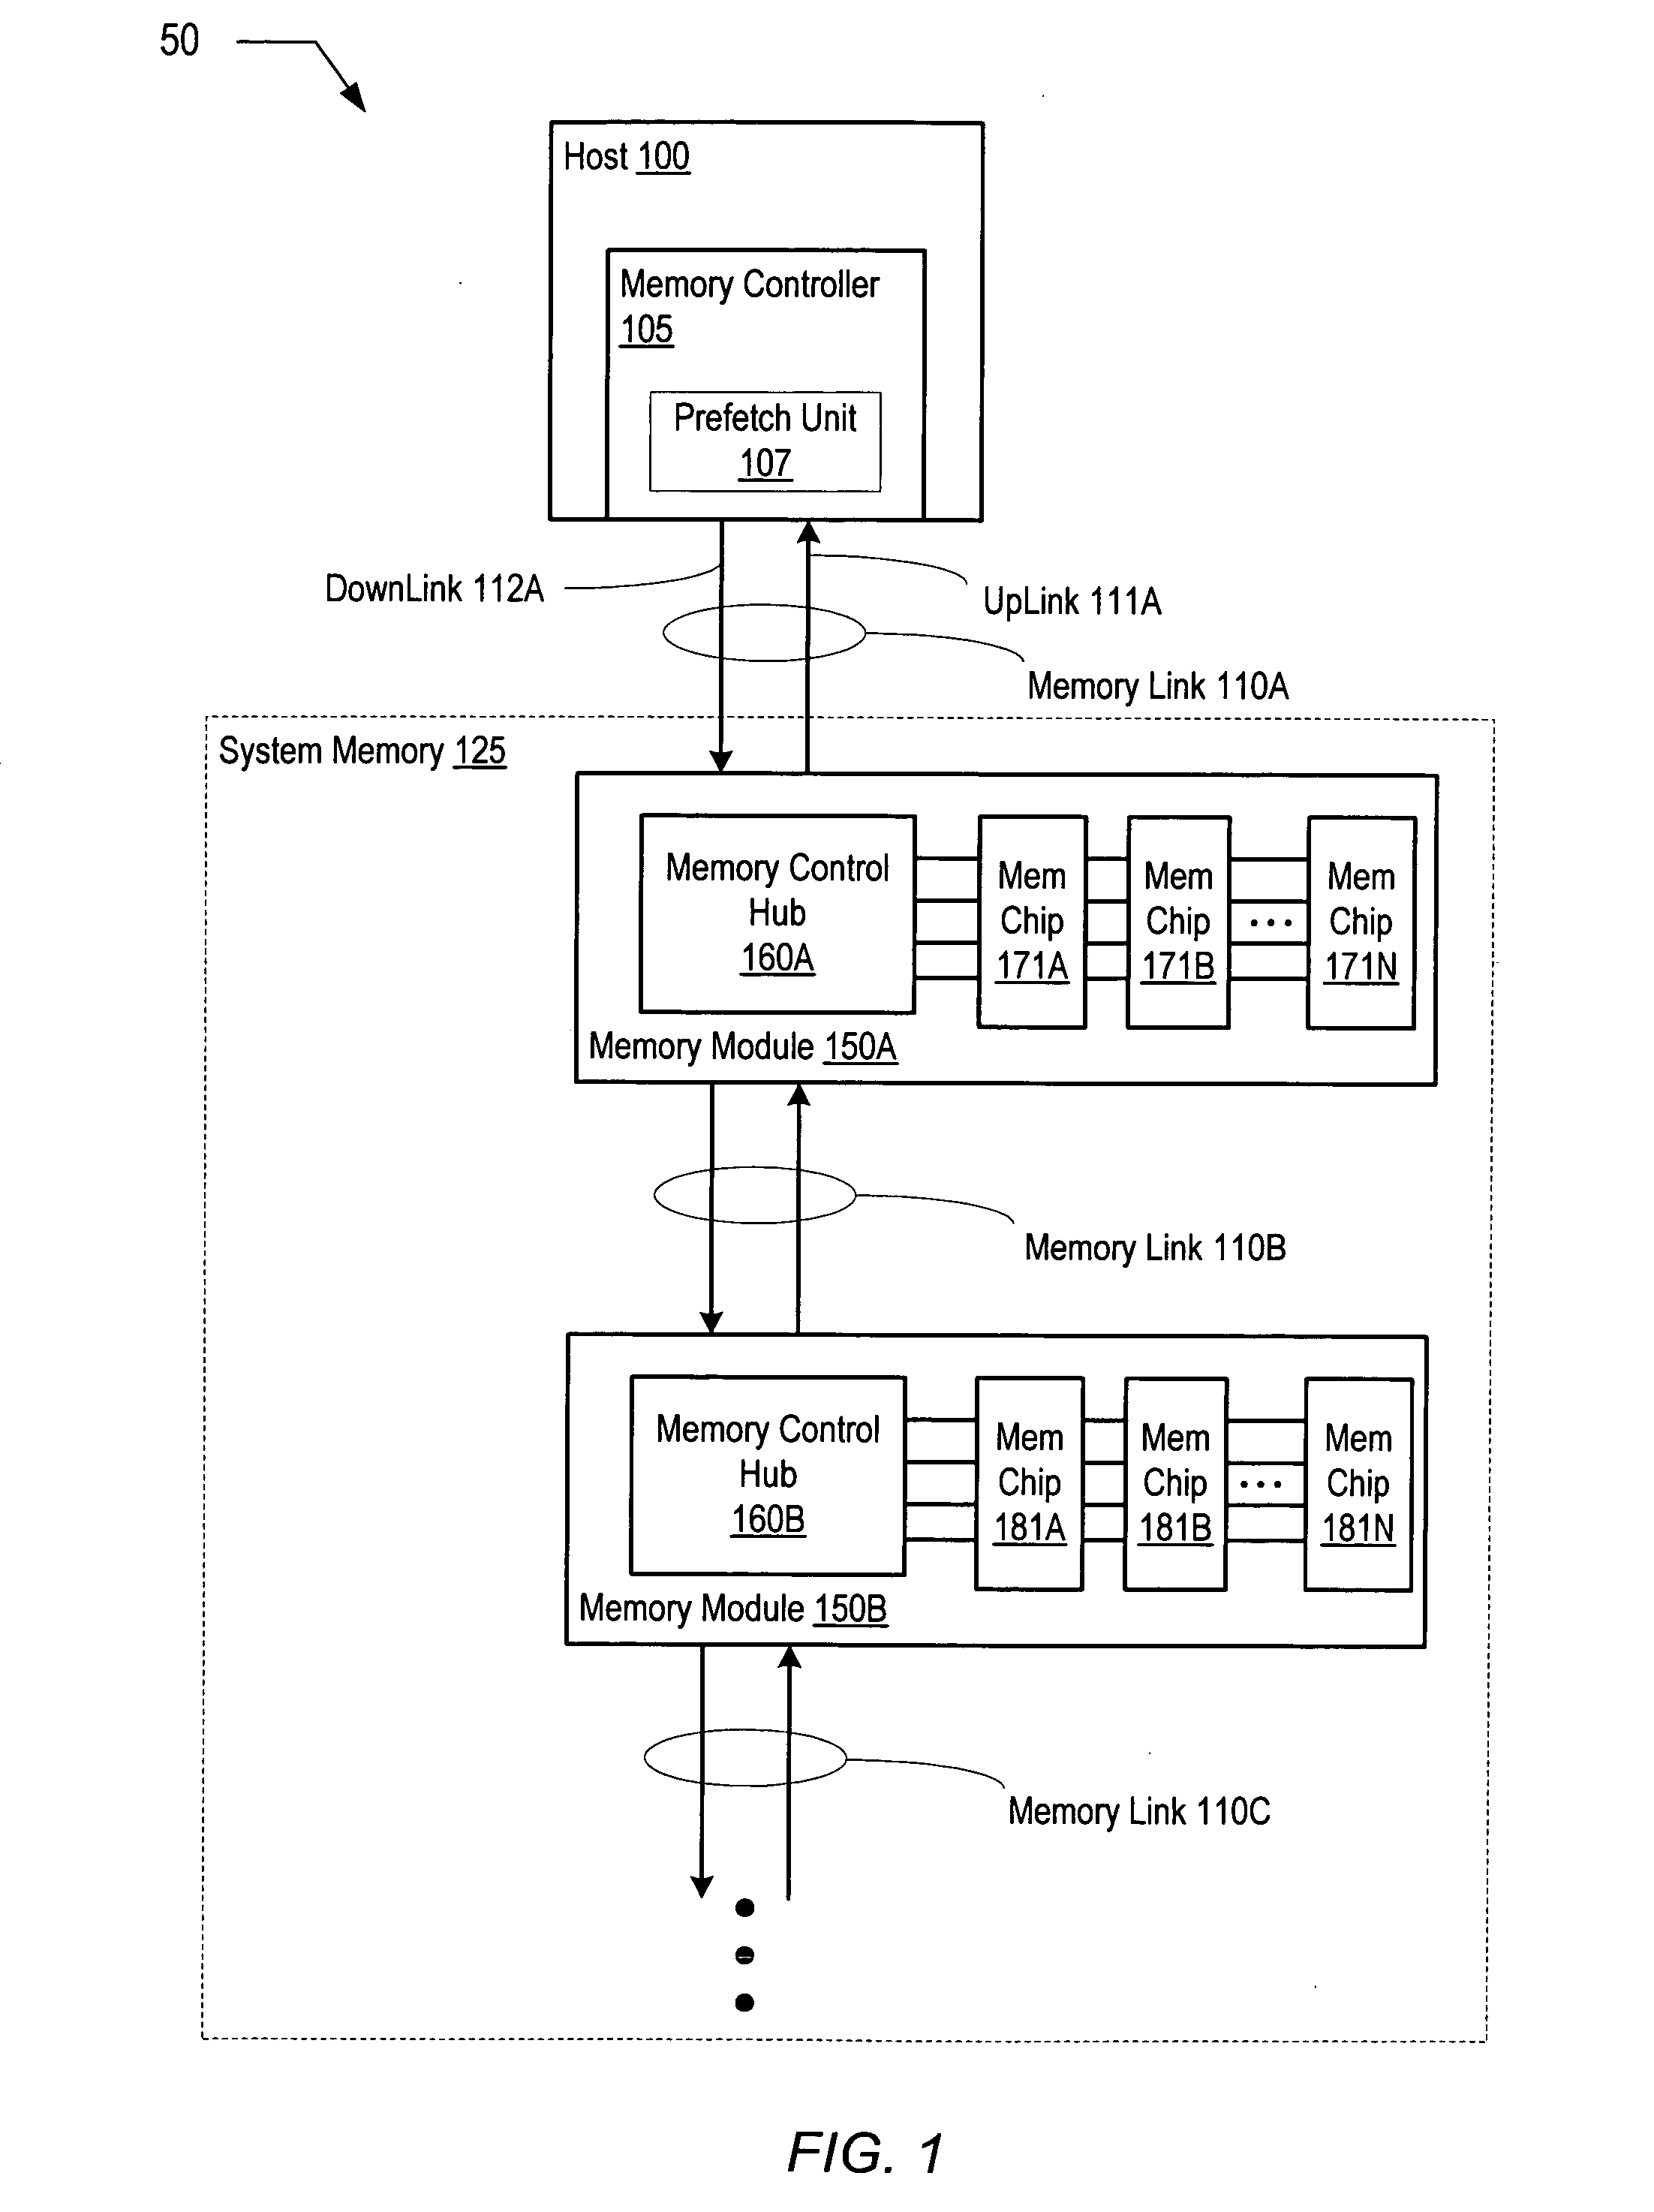 Prefetch mechanism for use in a system including a host connected to a plurality of memory modules via a serial memory interconnect